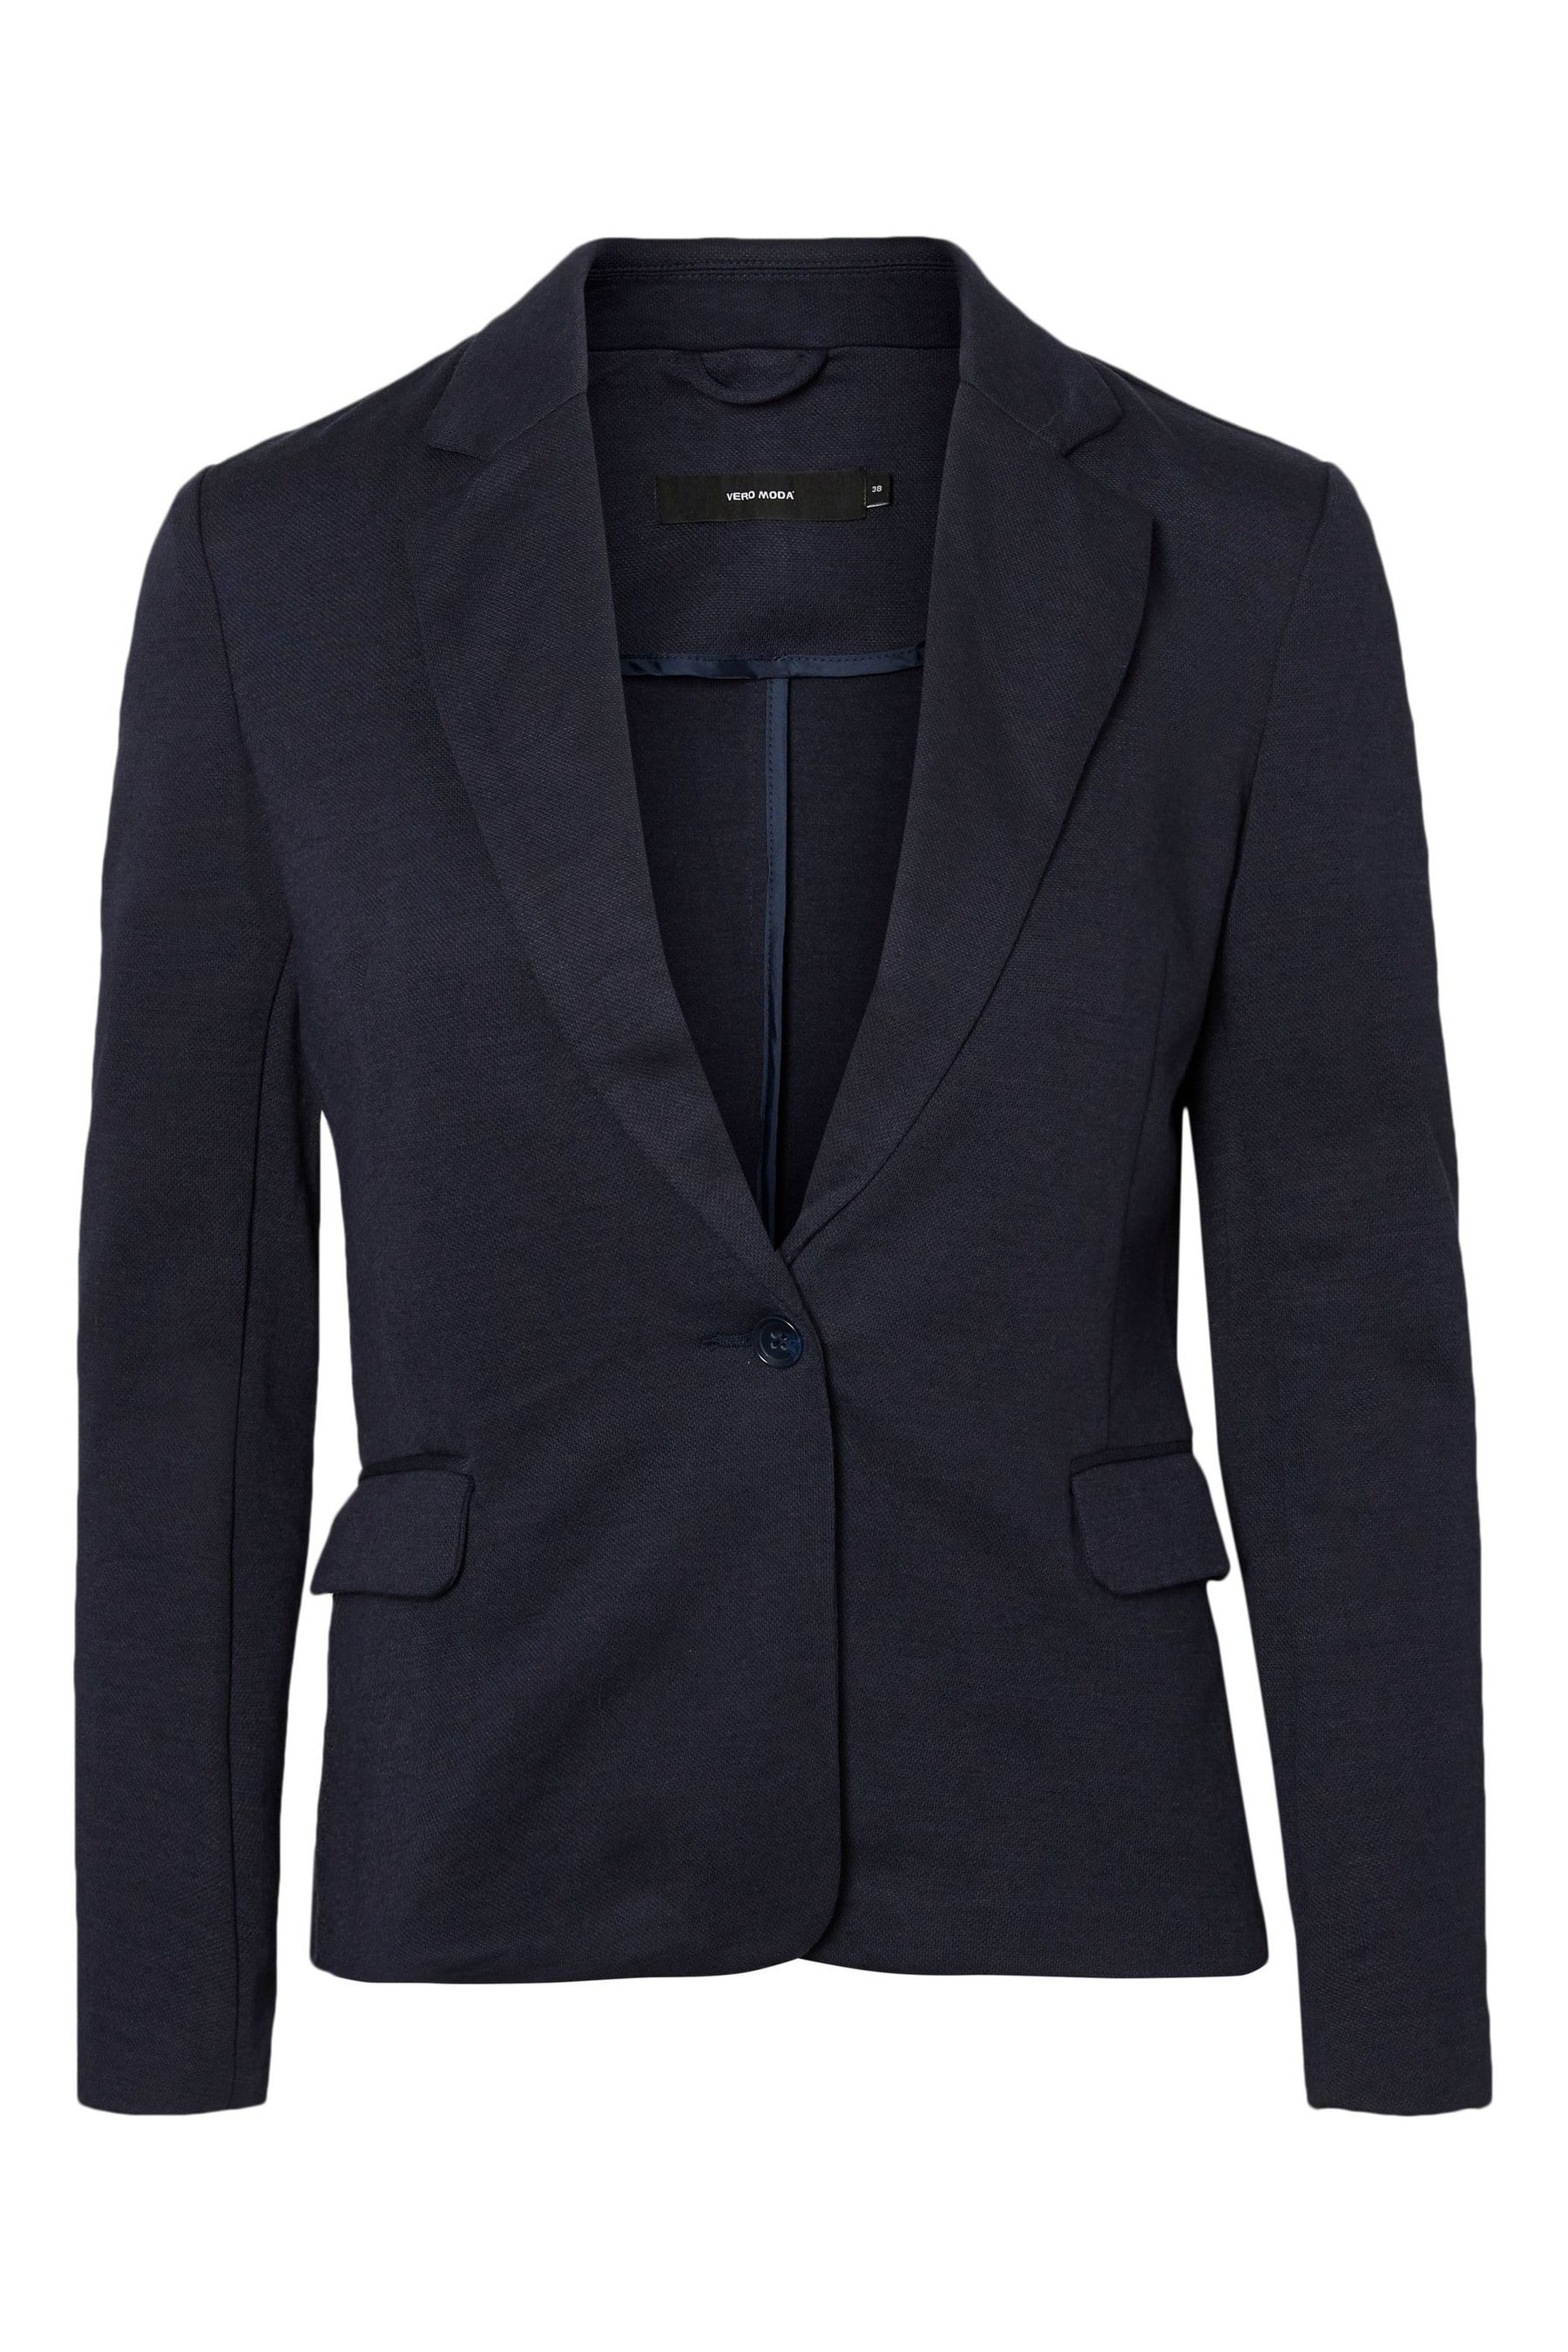 Buy Vero Moda Fitted Blazer from the Next UK online shop